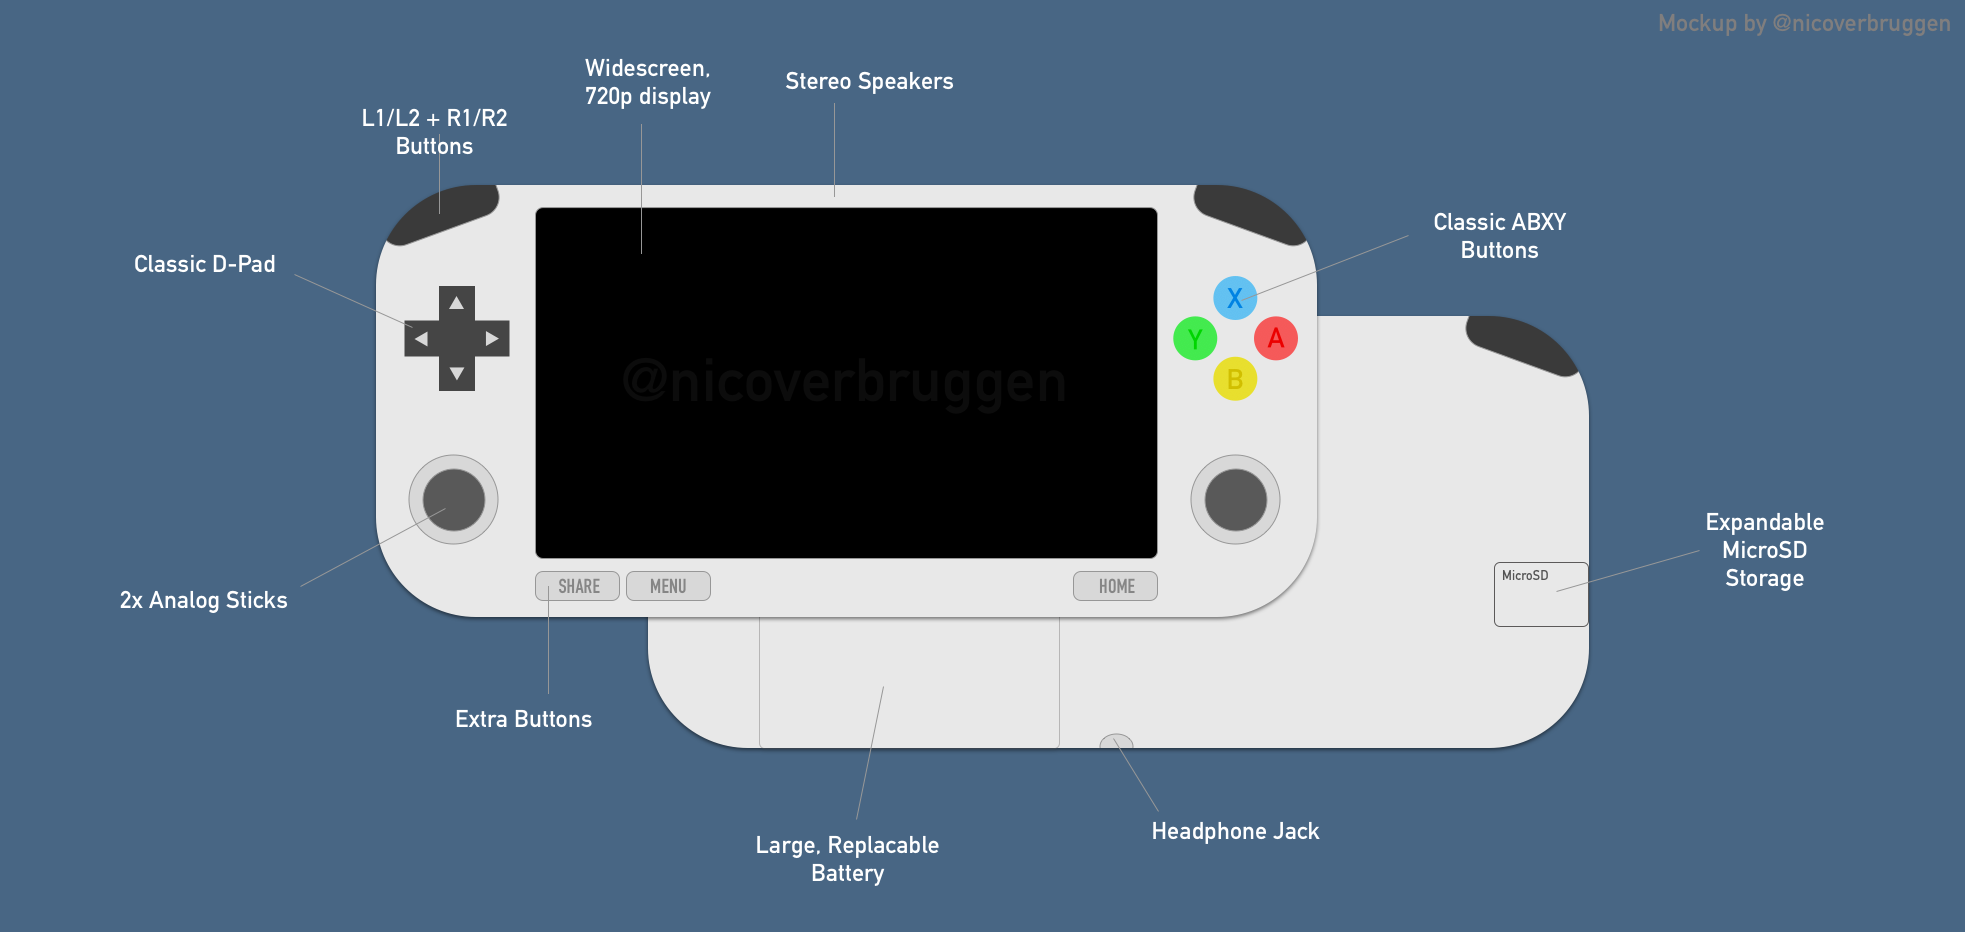 Perhaps this is the ideal handheld? I’ve made a quick mockup to reflect what handheld I’d love to have. Now, this could be aesthetically pleasing, but this is only a mockup and deserves a better design, some day. (At the bottom, there could be a USB-C port for charging the device, and possibly to output the screen’s display to a television.)